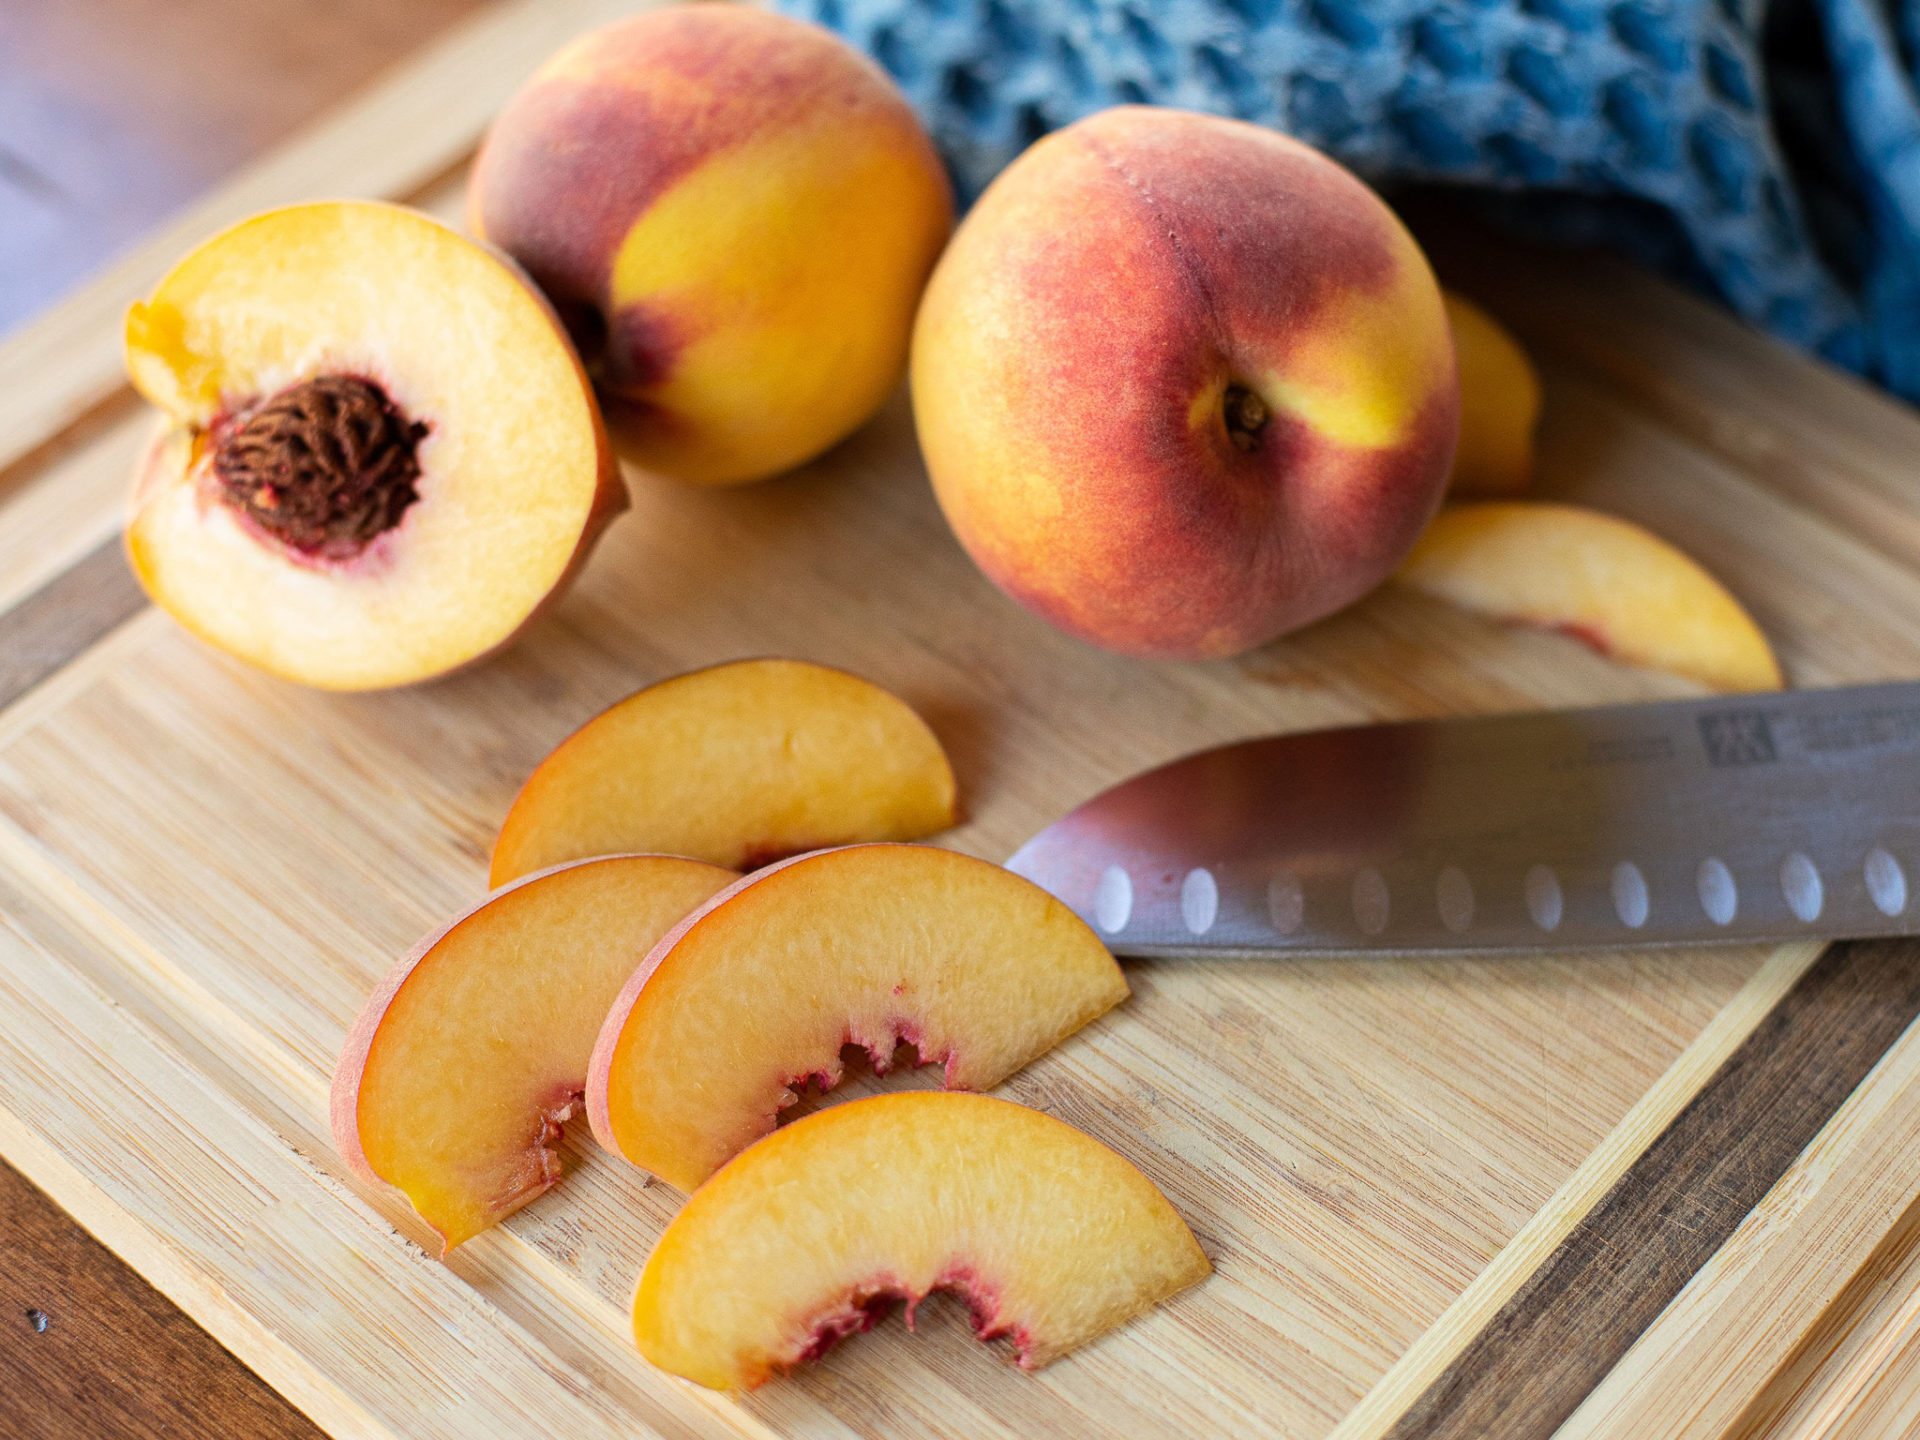 2-Pound Bag Of Kroger Peaches or Nectarines Just $1.99 At Kroger